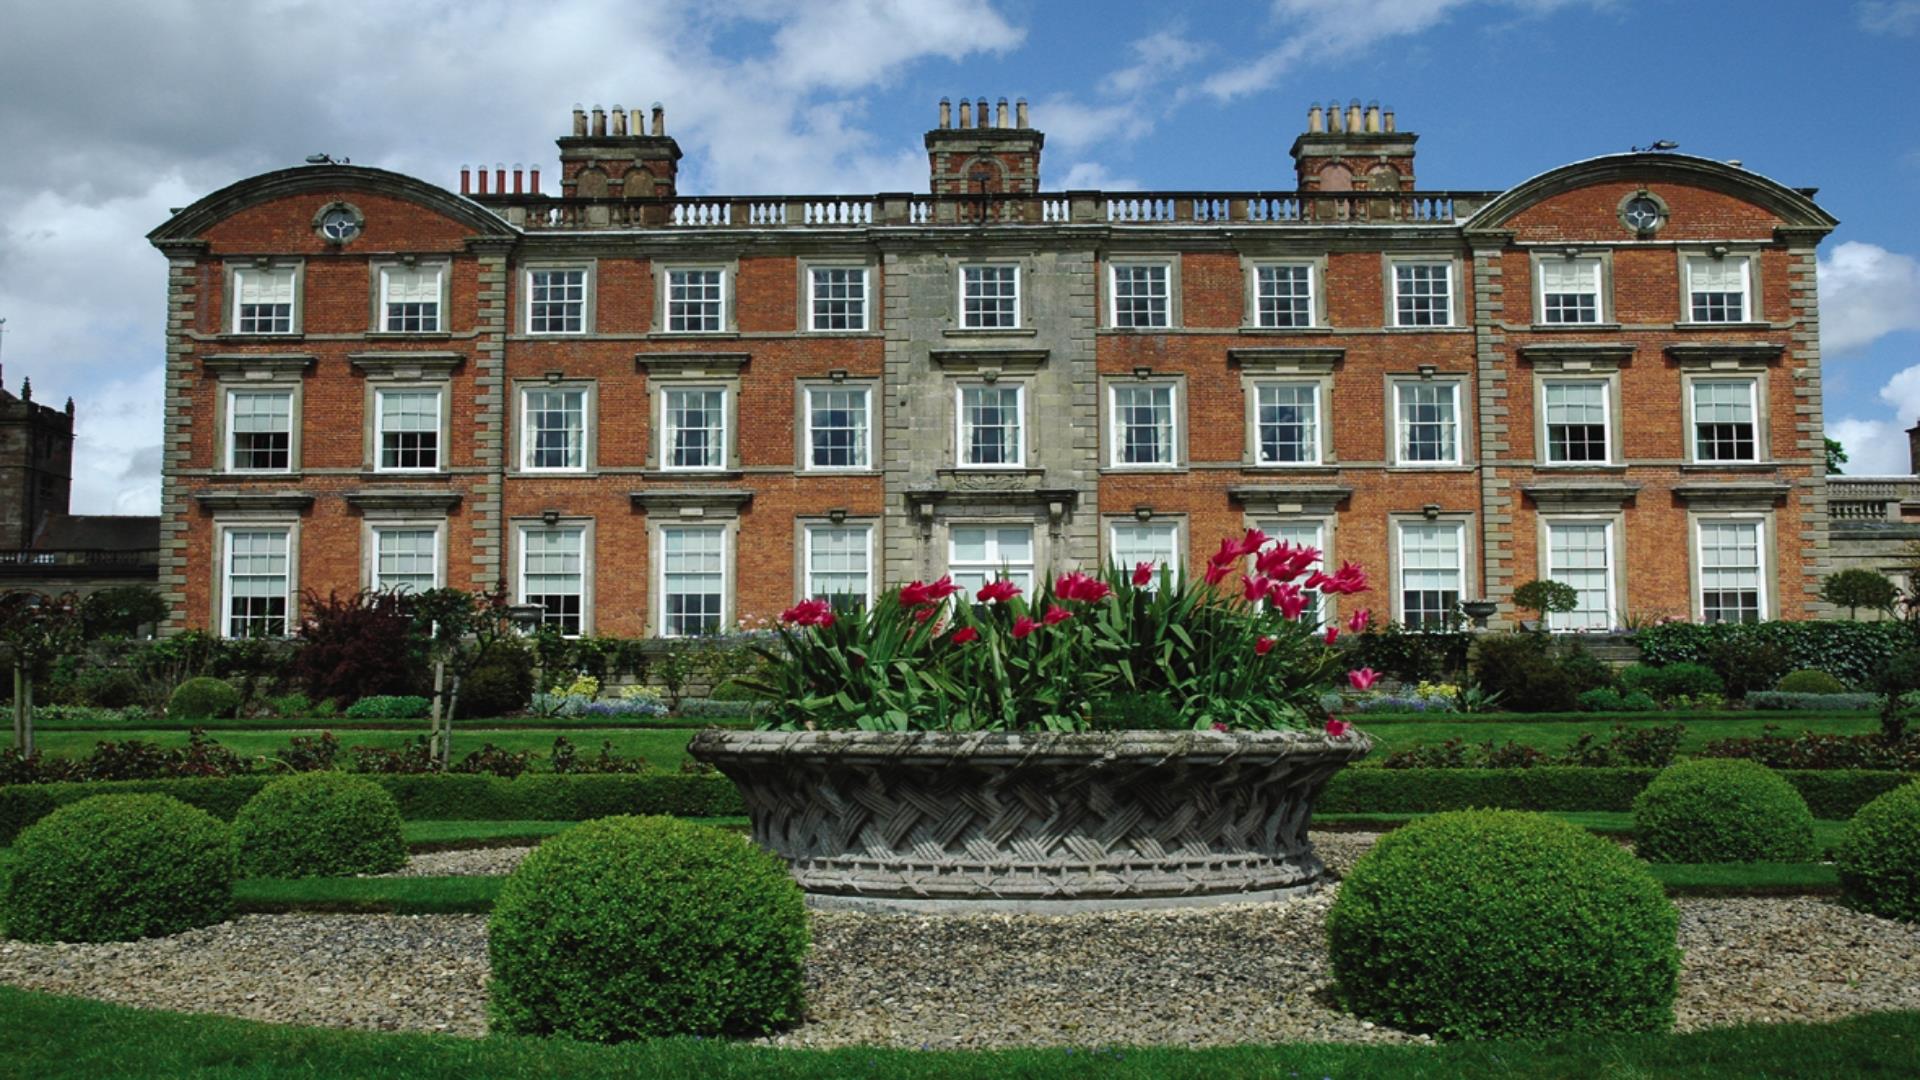 Exterior of Weston Park Stately Home in Telford